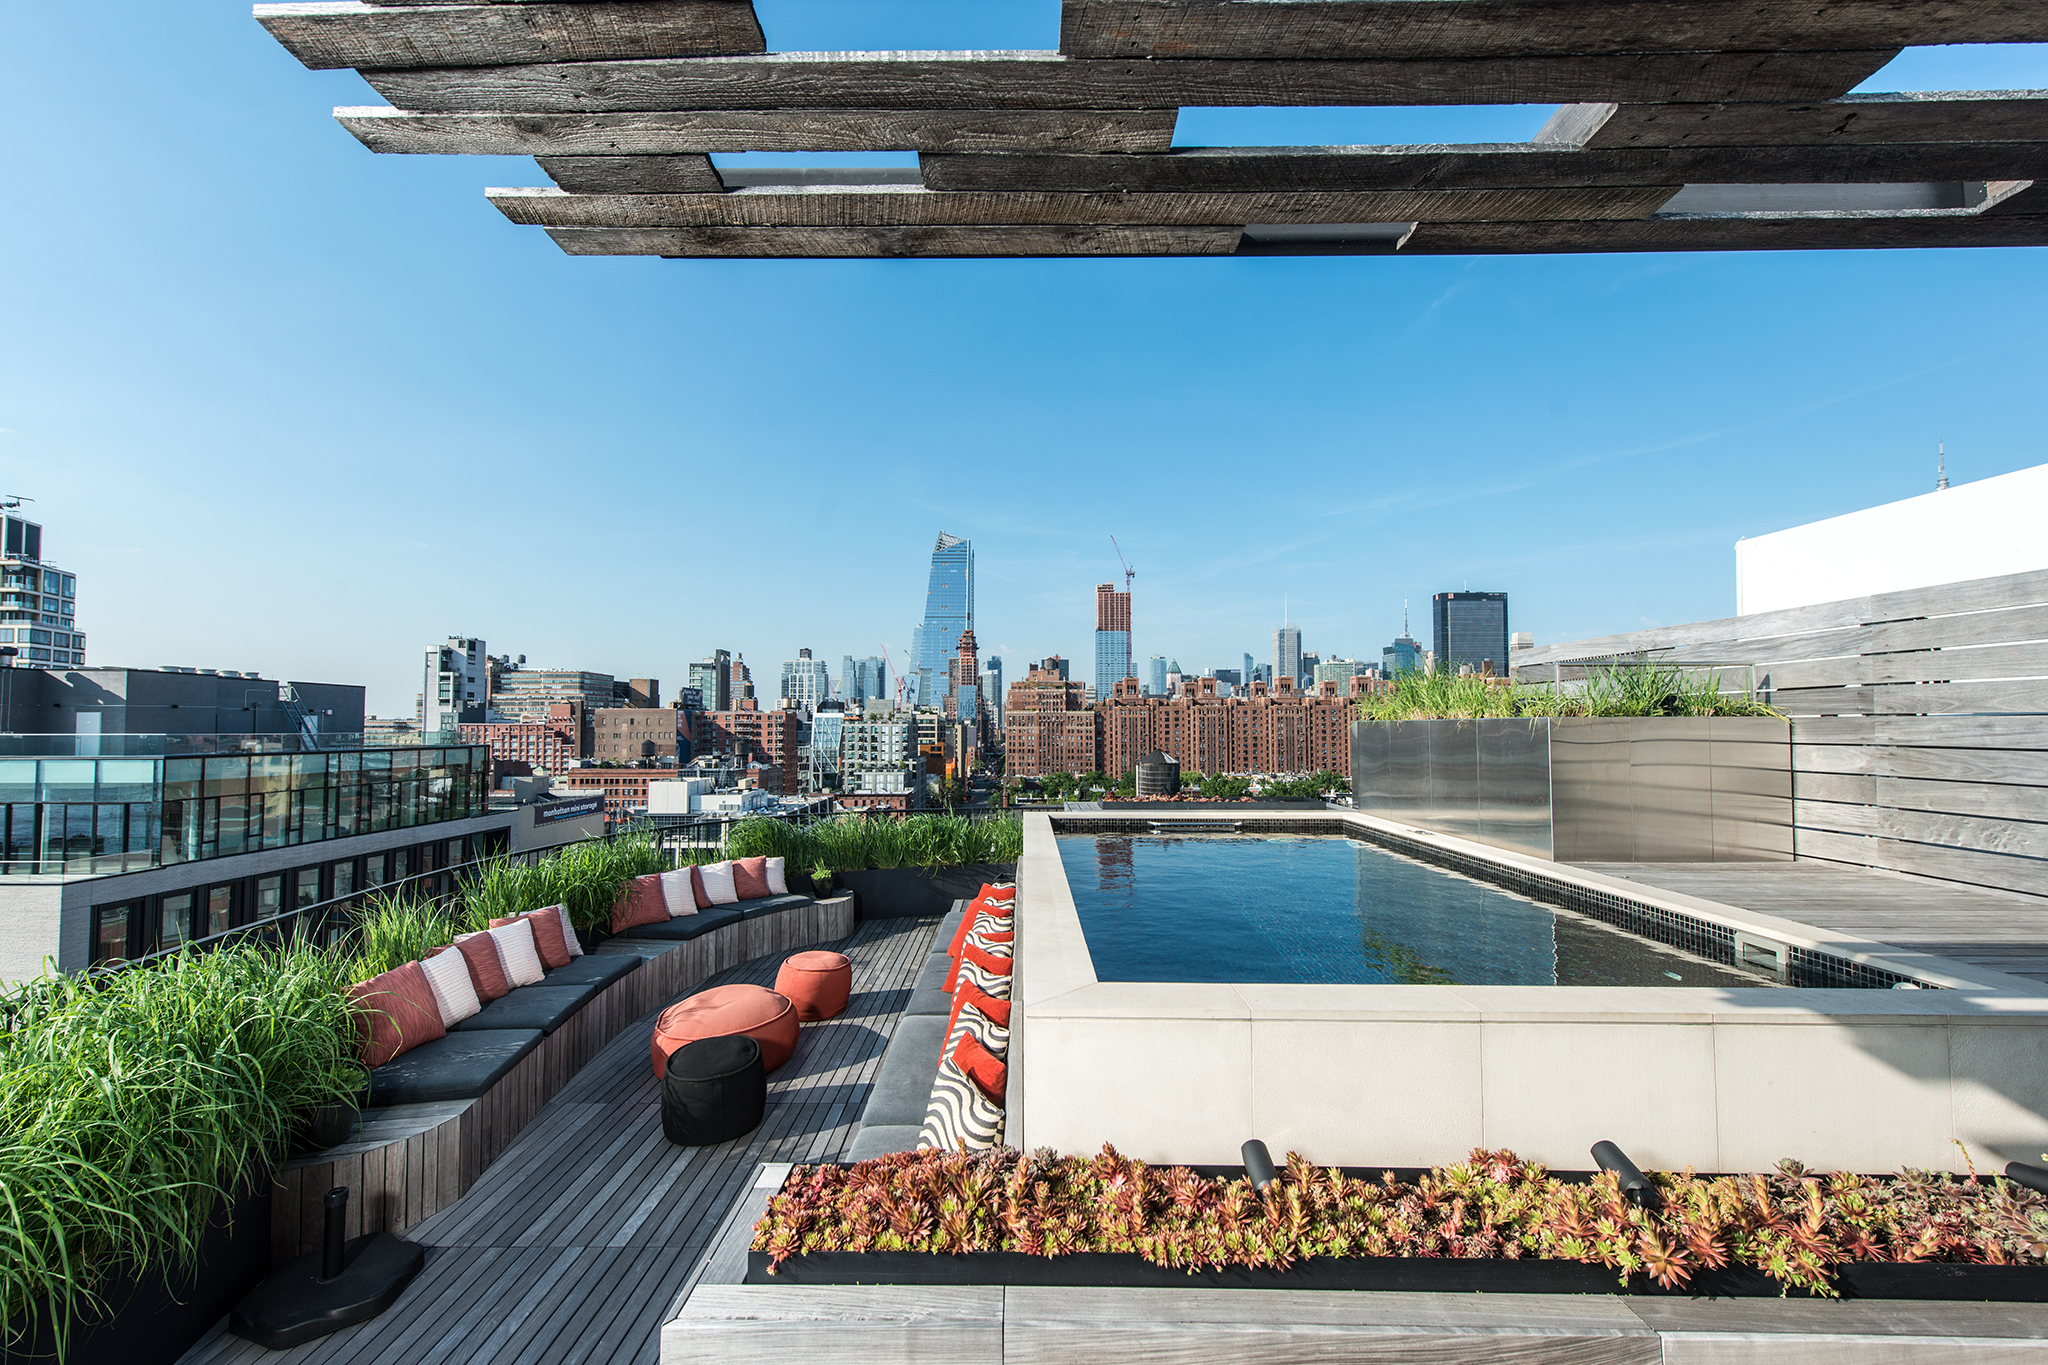 Photos of envy-inducing residential rooftops and private pools